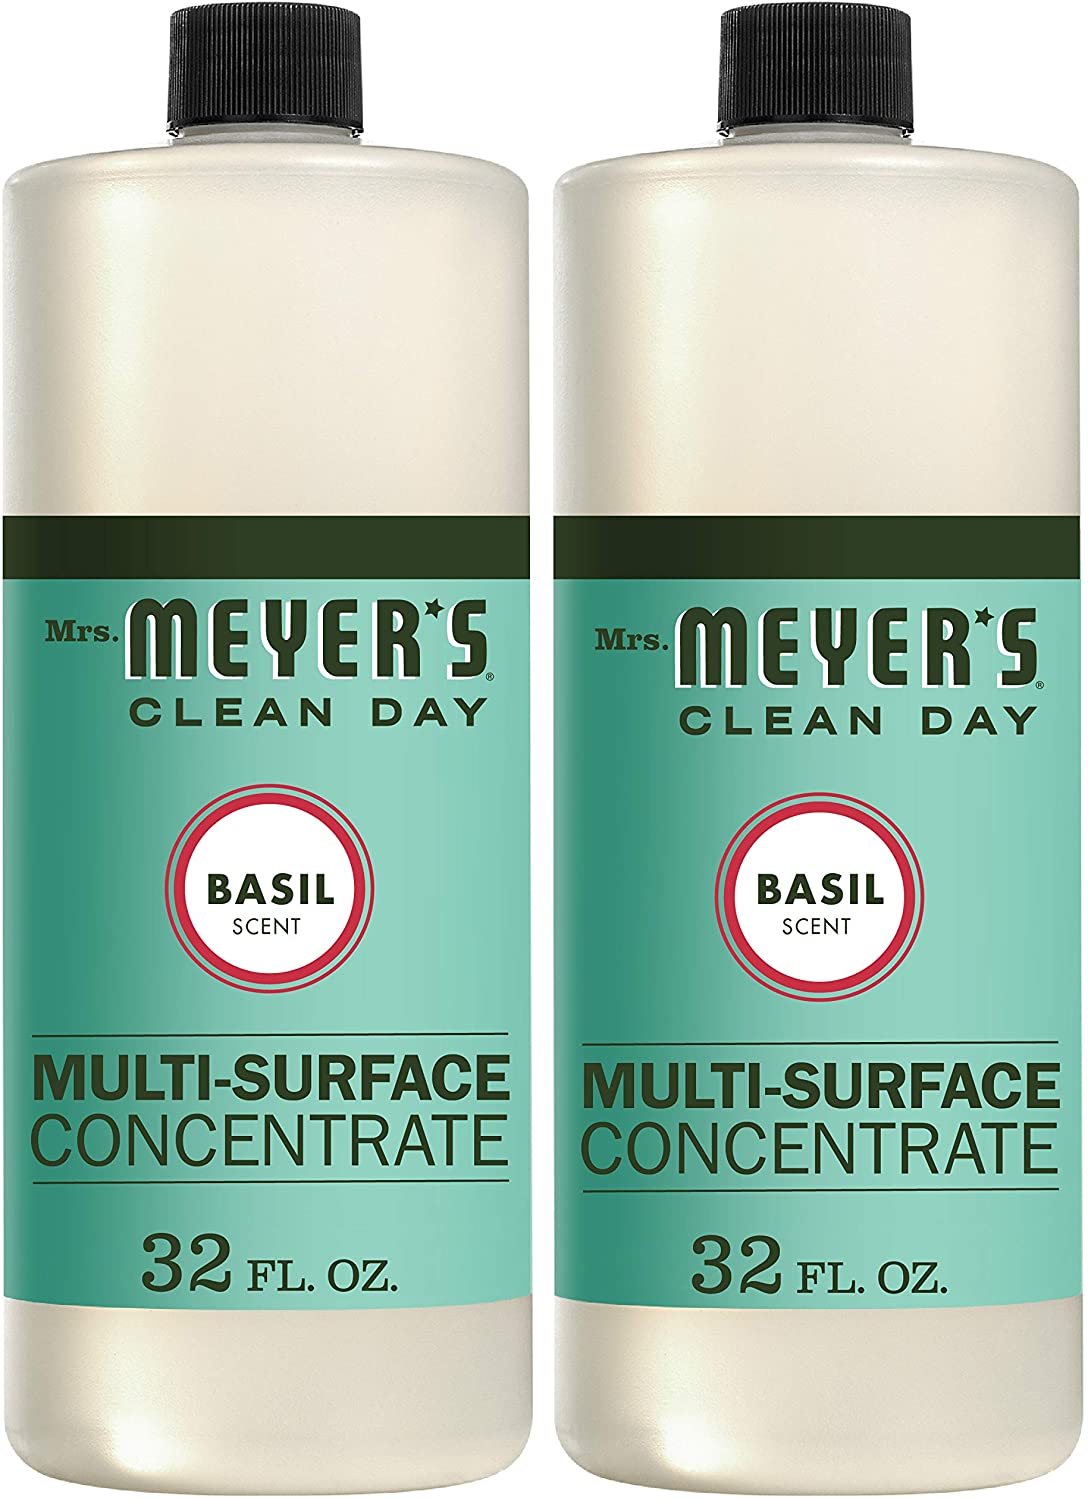 Mrs. Meyer’s Multi-Surface Concentrate, Basil Scent